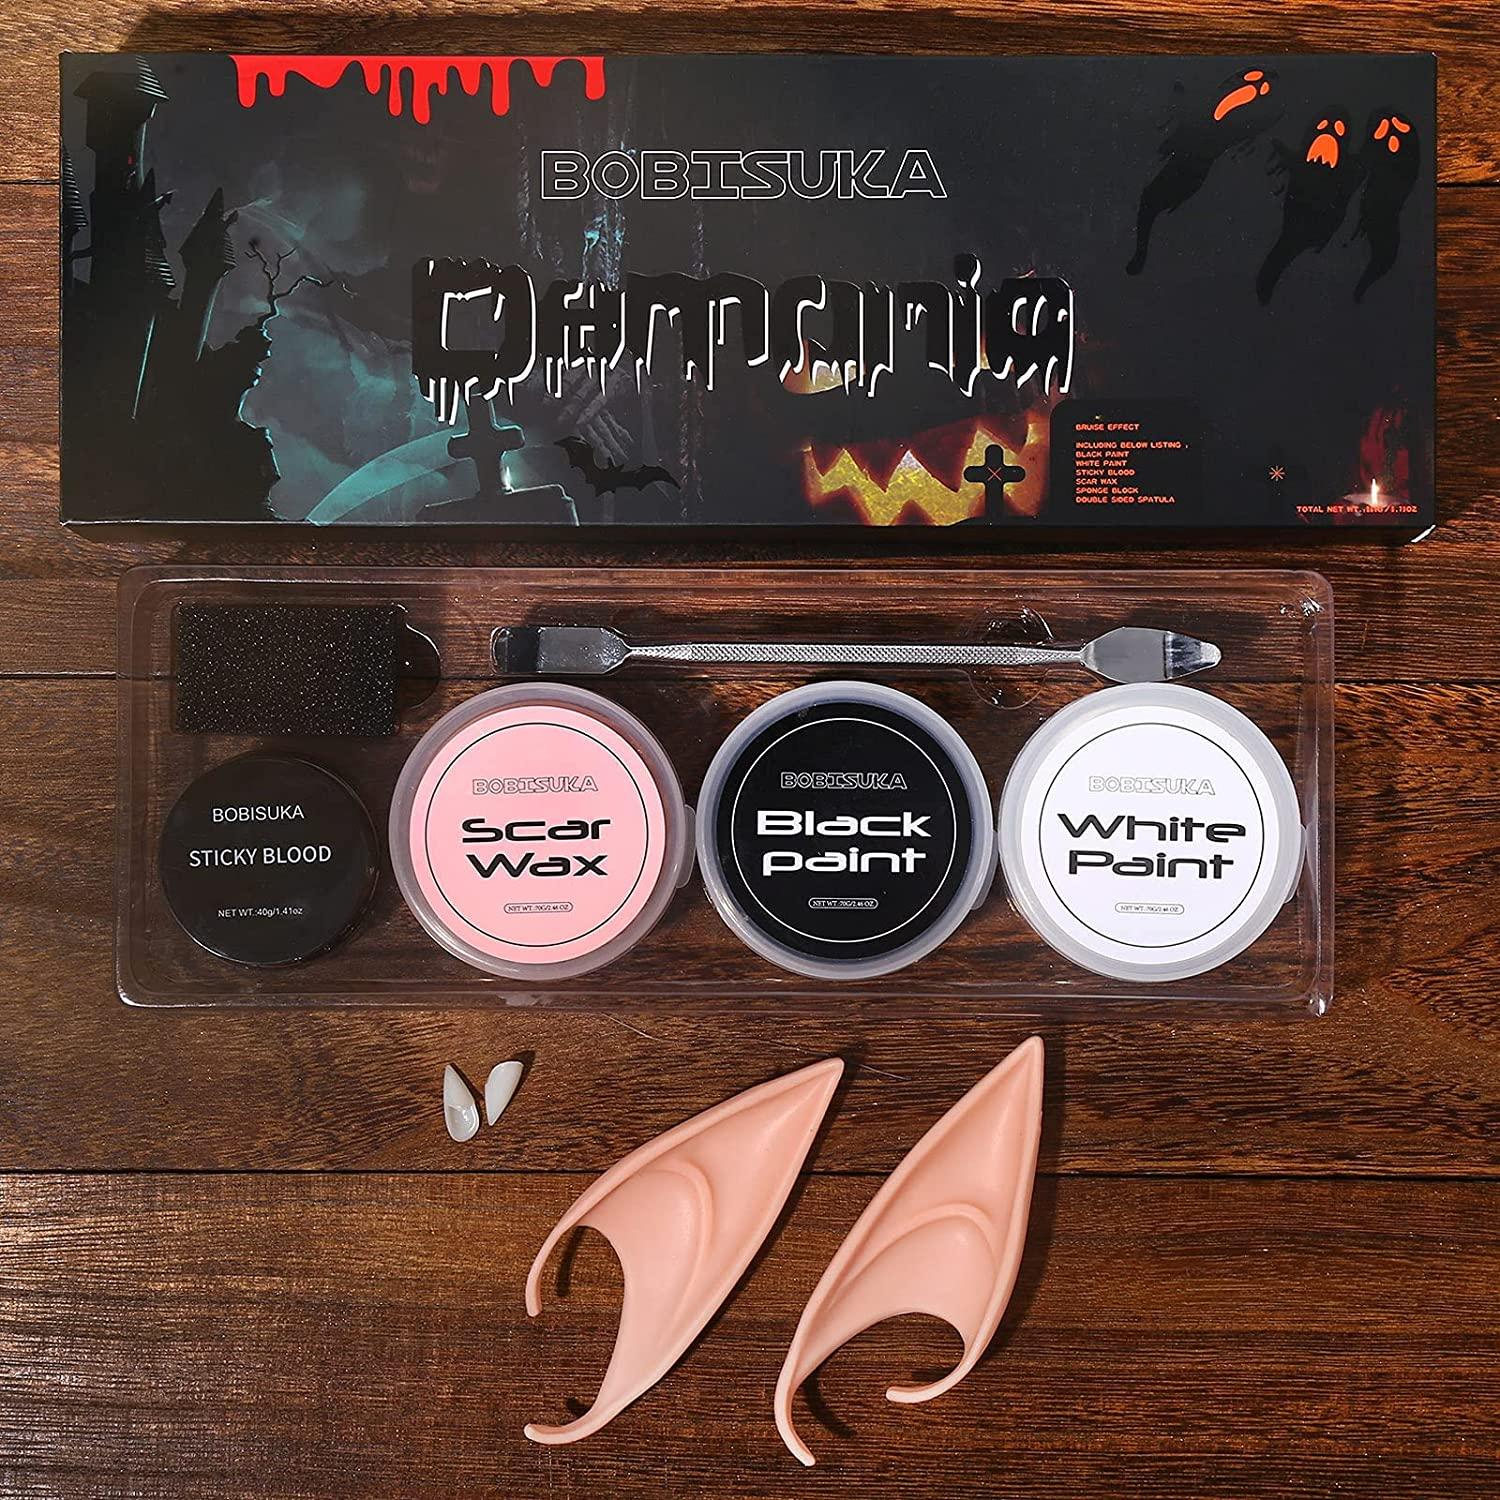  BOBISUKA Demonic Special Effects SFX Halloween Makeup Kit - 5  Colors Bruise Makeup Face Body Painting Palette + Scar Wax with Spatula  Tool + Fake Blood Splatter Spray + Fake